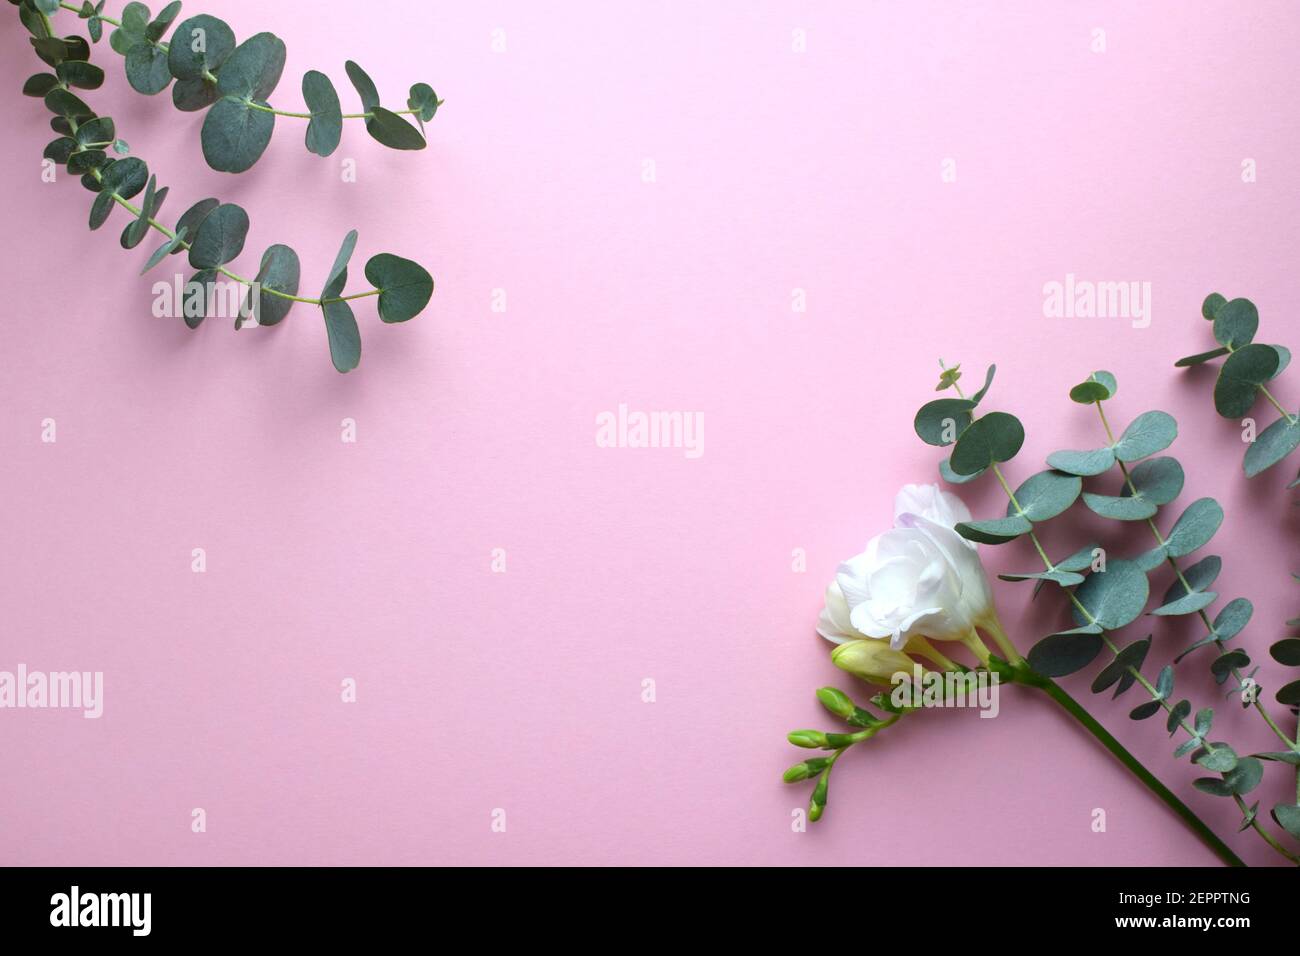 Floral background. Beautiful freesia flower and eucalyptus branches on a pink background. Minimalism. Flat lay, top view. Place for text. Stock Photo